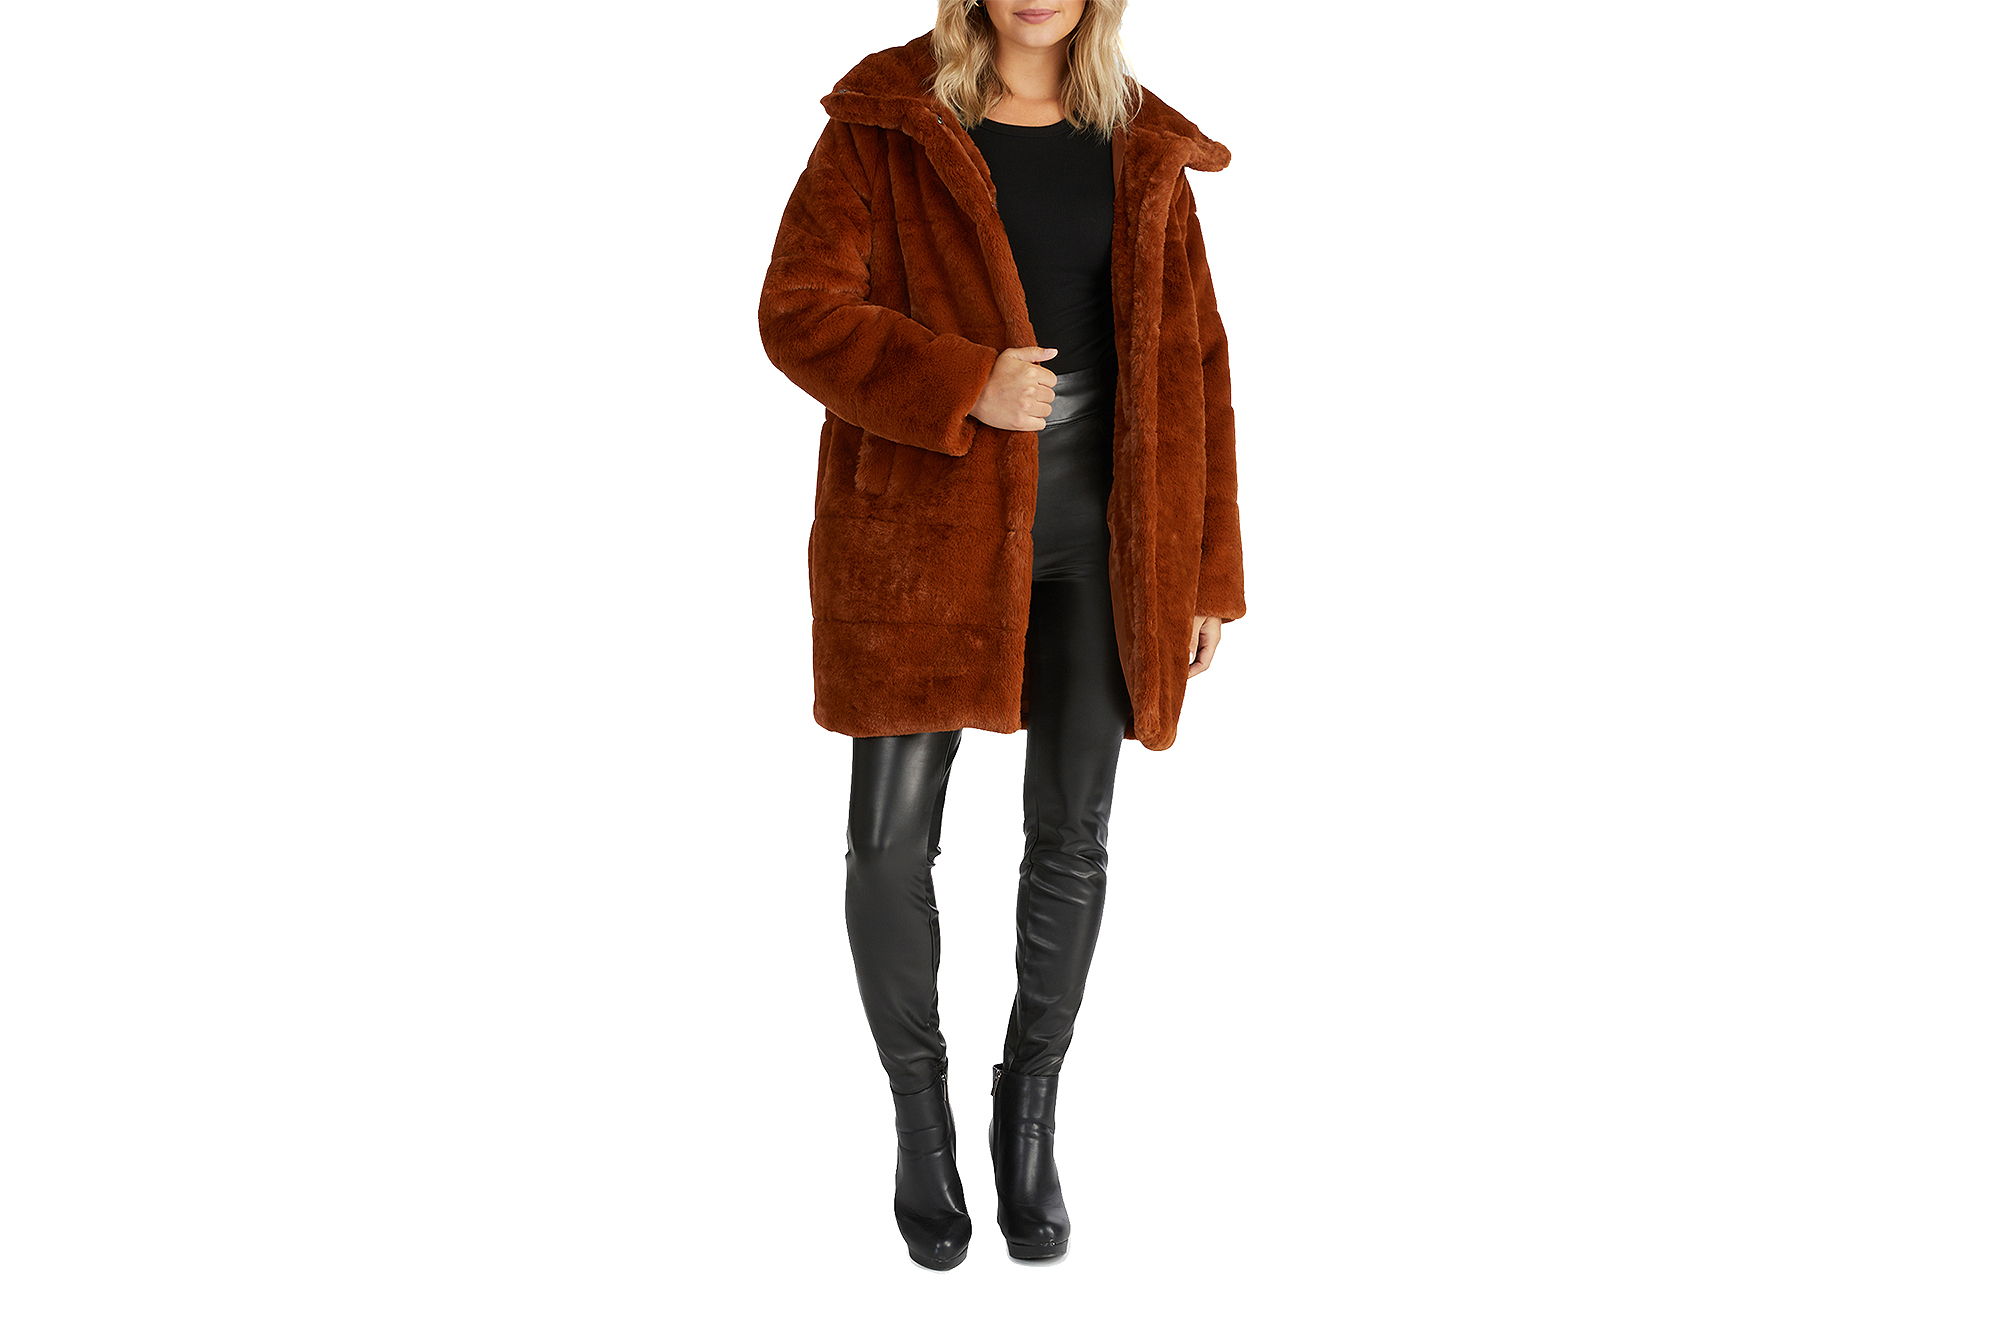 NVLT Super Luxe Faux-Fur Coat Is Such a Steal at 66% Off